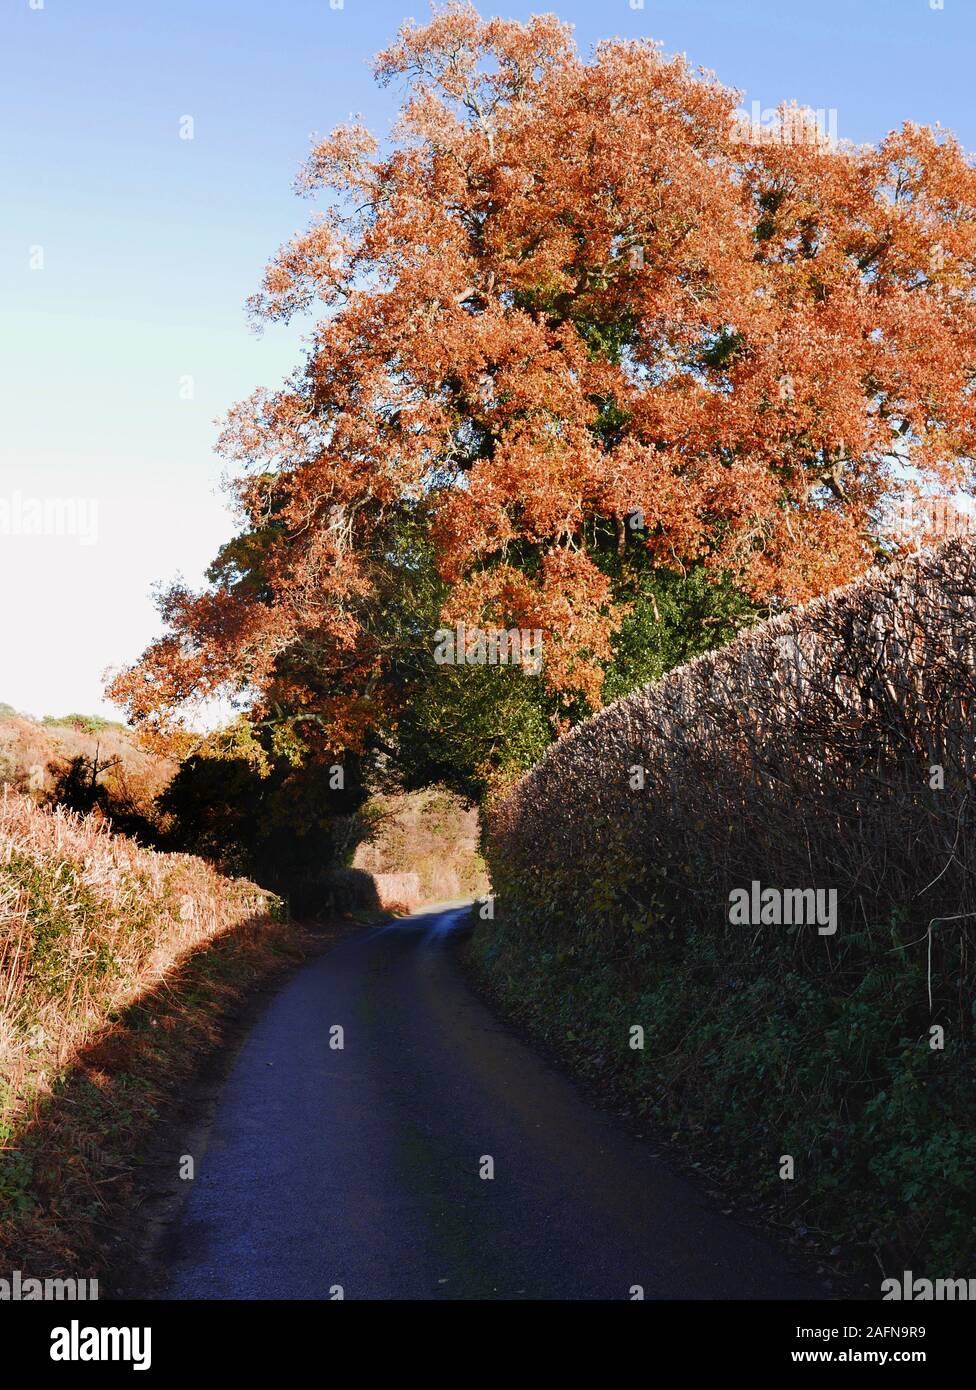 An old Oak tree covered in autumnal foliage with ivy growing up within on a country lane beside a river, half in shade and a beautiful autumn day Stock Photo